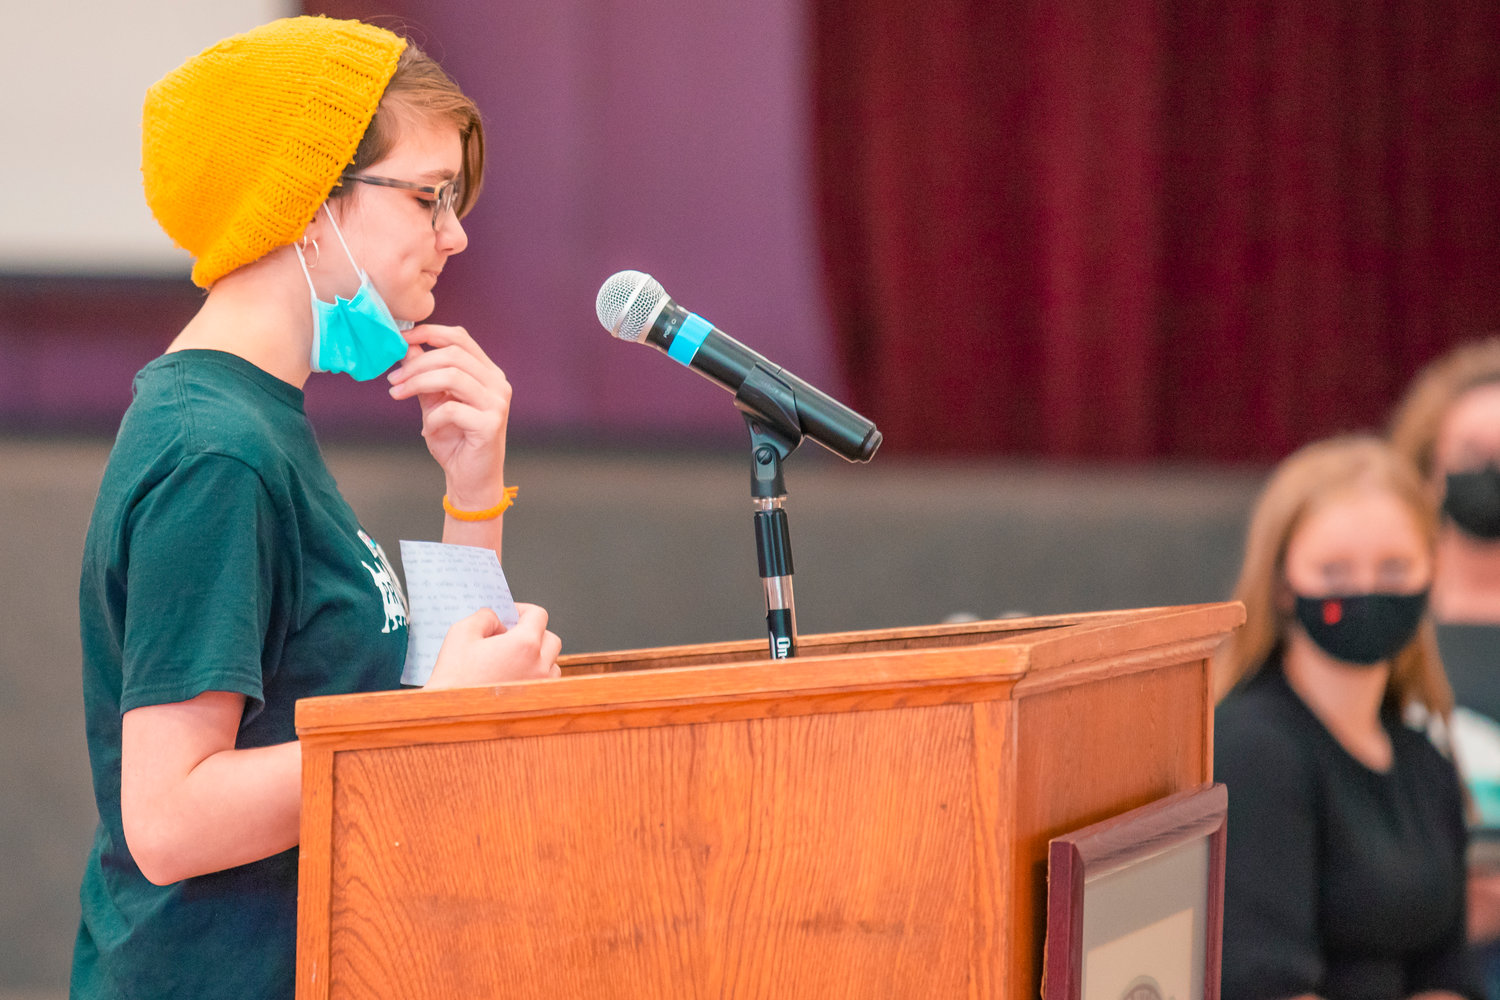 Chloe Phillips makes a speech at W.F. West in support of BP 3211 during a public meeting Tuesday in Chehalis.